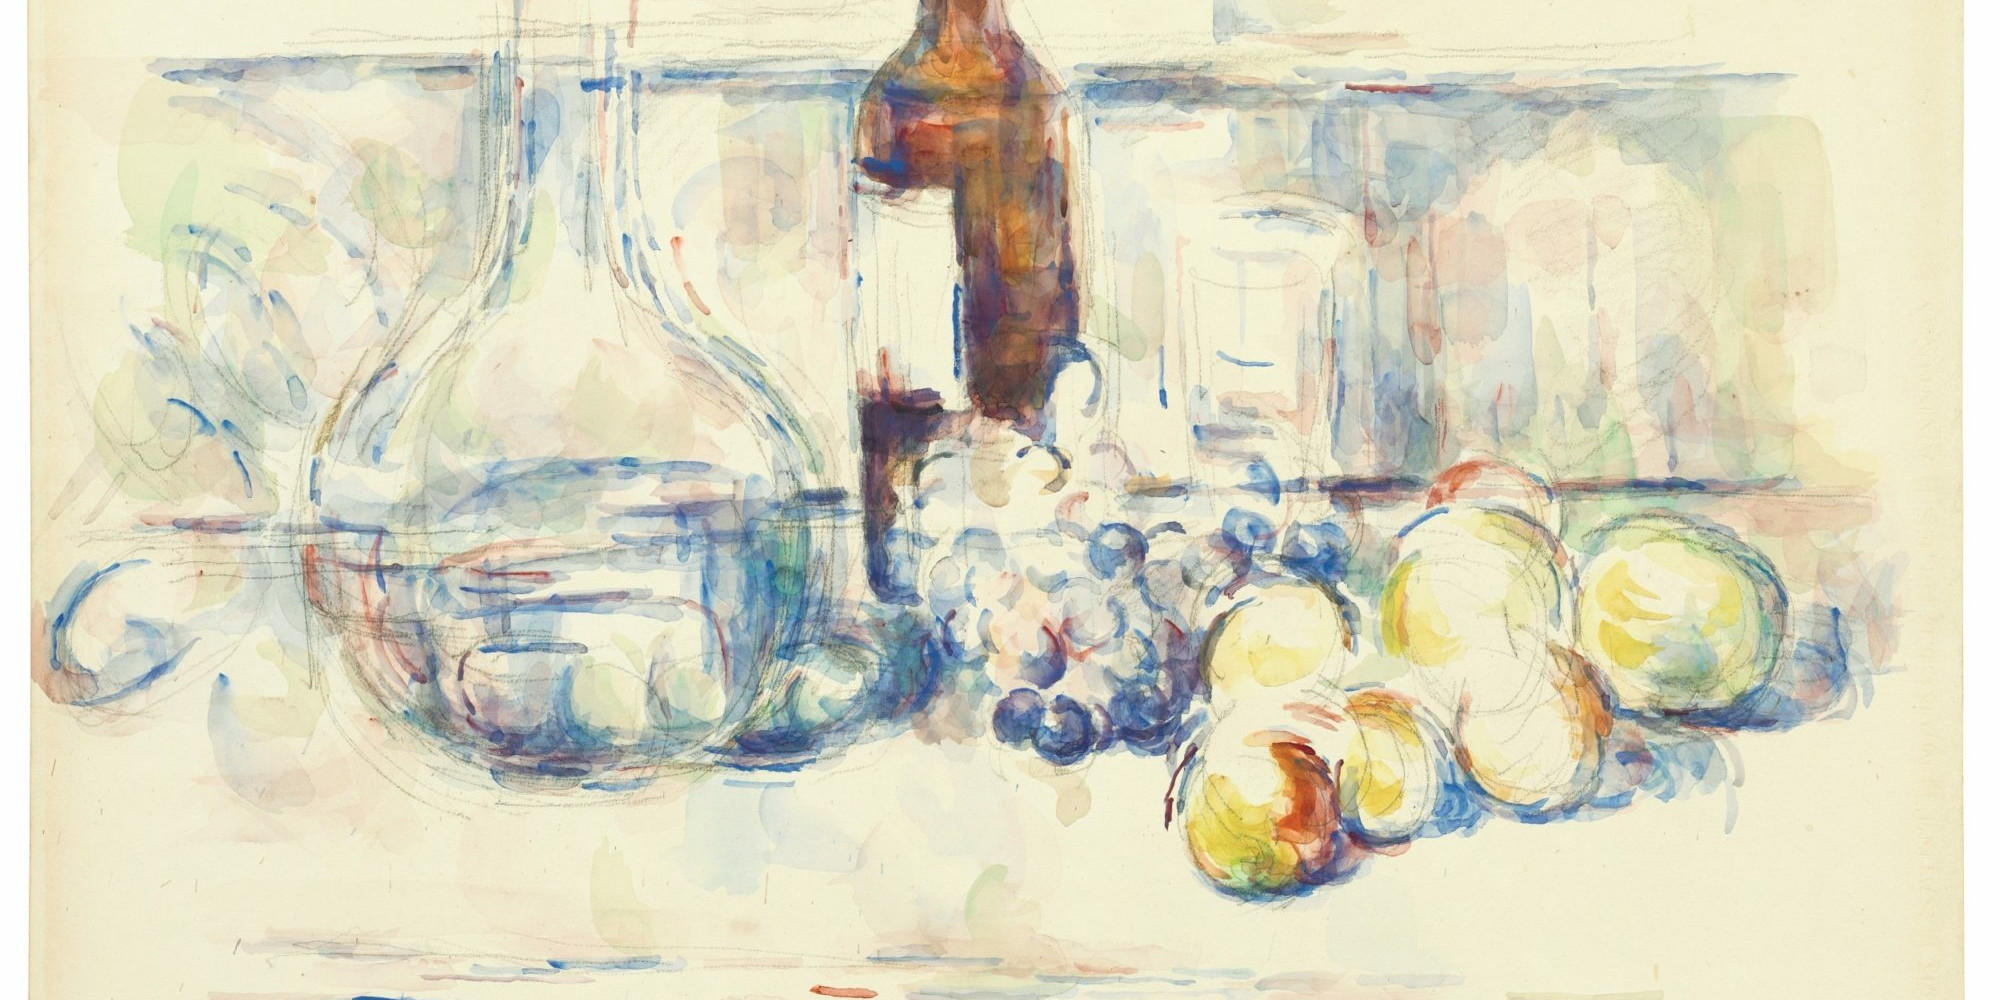 Paul Cézanne. Still Life with Carafe, Bottle, and Fruit (La Bouteille de cognac). 1906. Pencil and watercolor on paper, 18 7/8 × 24 5/8″ (48 × 62.5 cm). Henry and Rose Pearlman Foundation (on extended loan to the Princeton University Art Museum). The Henry and Rose Pearlman Collection/Art Resource, NY. Photo: Bruce M. White